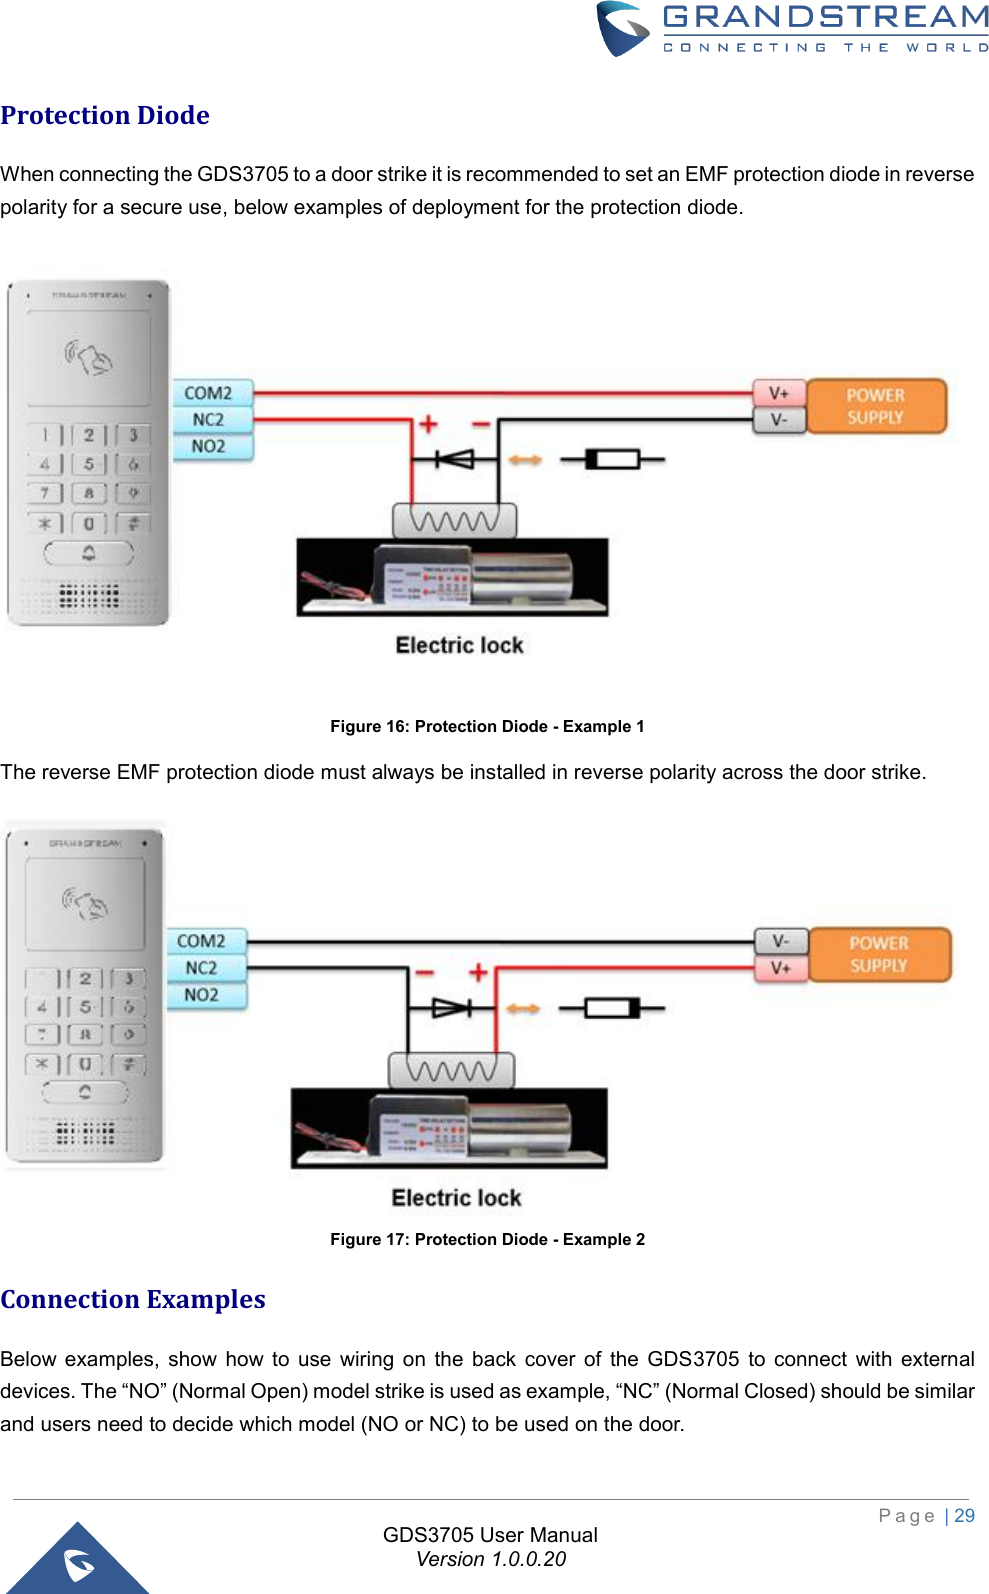                                                                         P a g e  | 29  GDS3705 User Manual Version 1.0.0.20 Protection Diode When connecting the GDS3705 to a door strike it is recommended to set an EMF protection diode in reverse polarity for a secure use, below examples of deployment for the protection diode.   Figure 16: Protection Diode - Example 1 The reverse EMF protection diode must always be installed in reverse polarity across the door strike.  Figure 17: Protection Diode - Example 2 Connection Examples Below  examples,  show  how  to  use  wiring  on  the  back  cover  of  the  GDS3705  to  connect  with  external devices. The “NO” (Normal Open) model strike is used as example, “NC” (Normal Closed) should be similar and users need to decide which model (NO or NC) to be used on the door.    